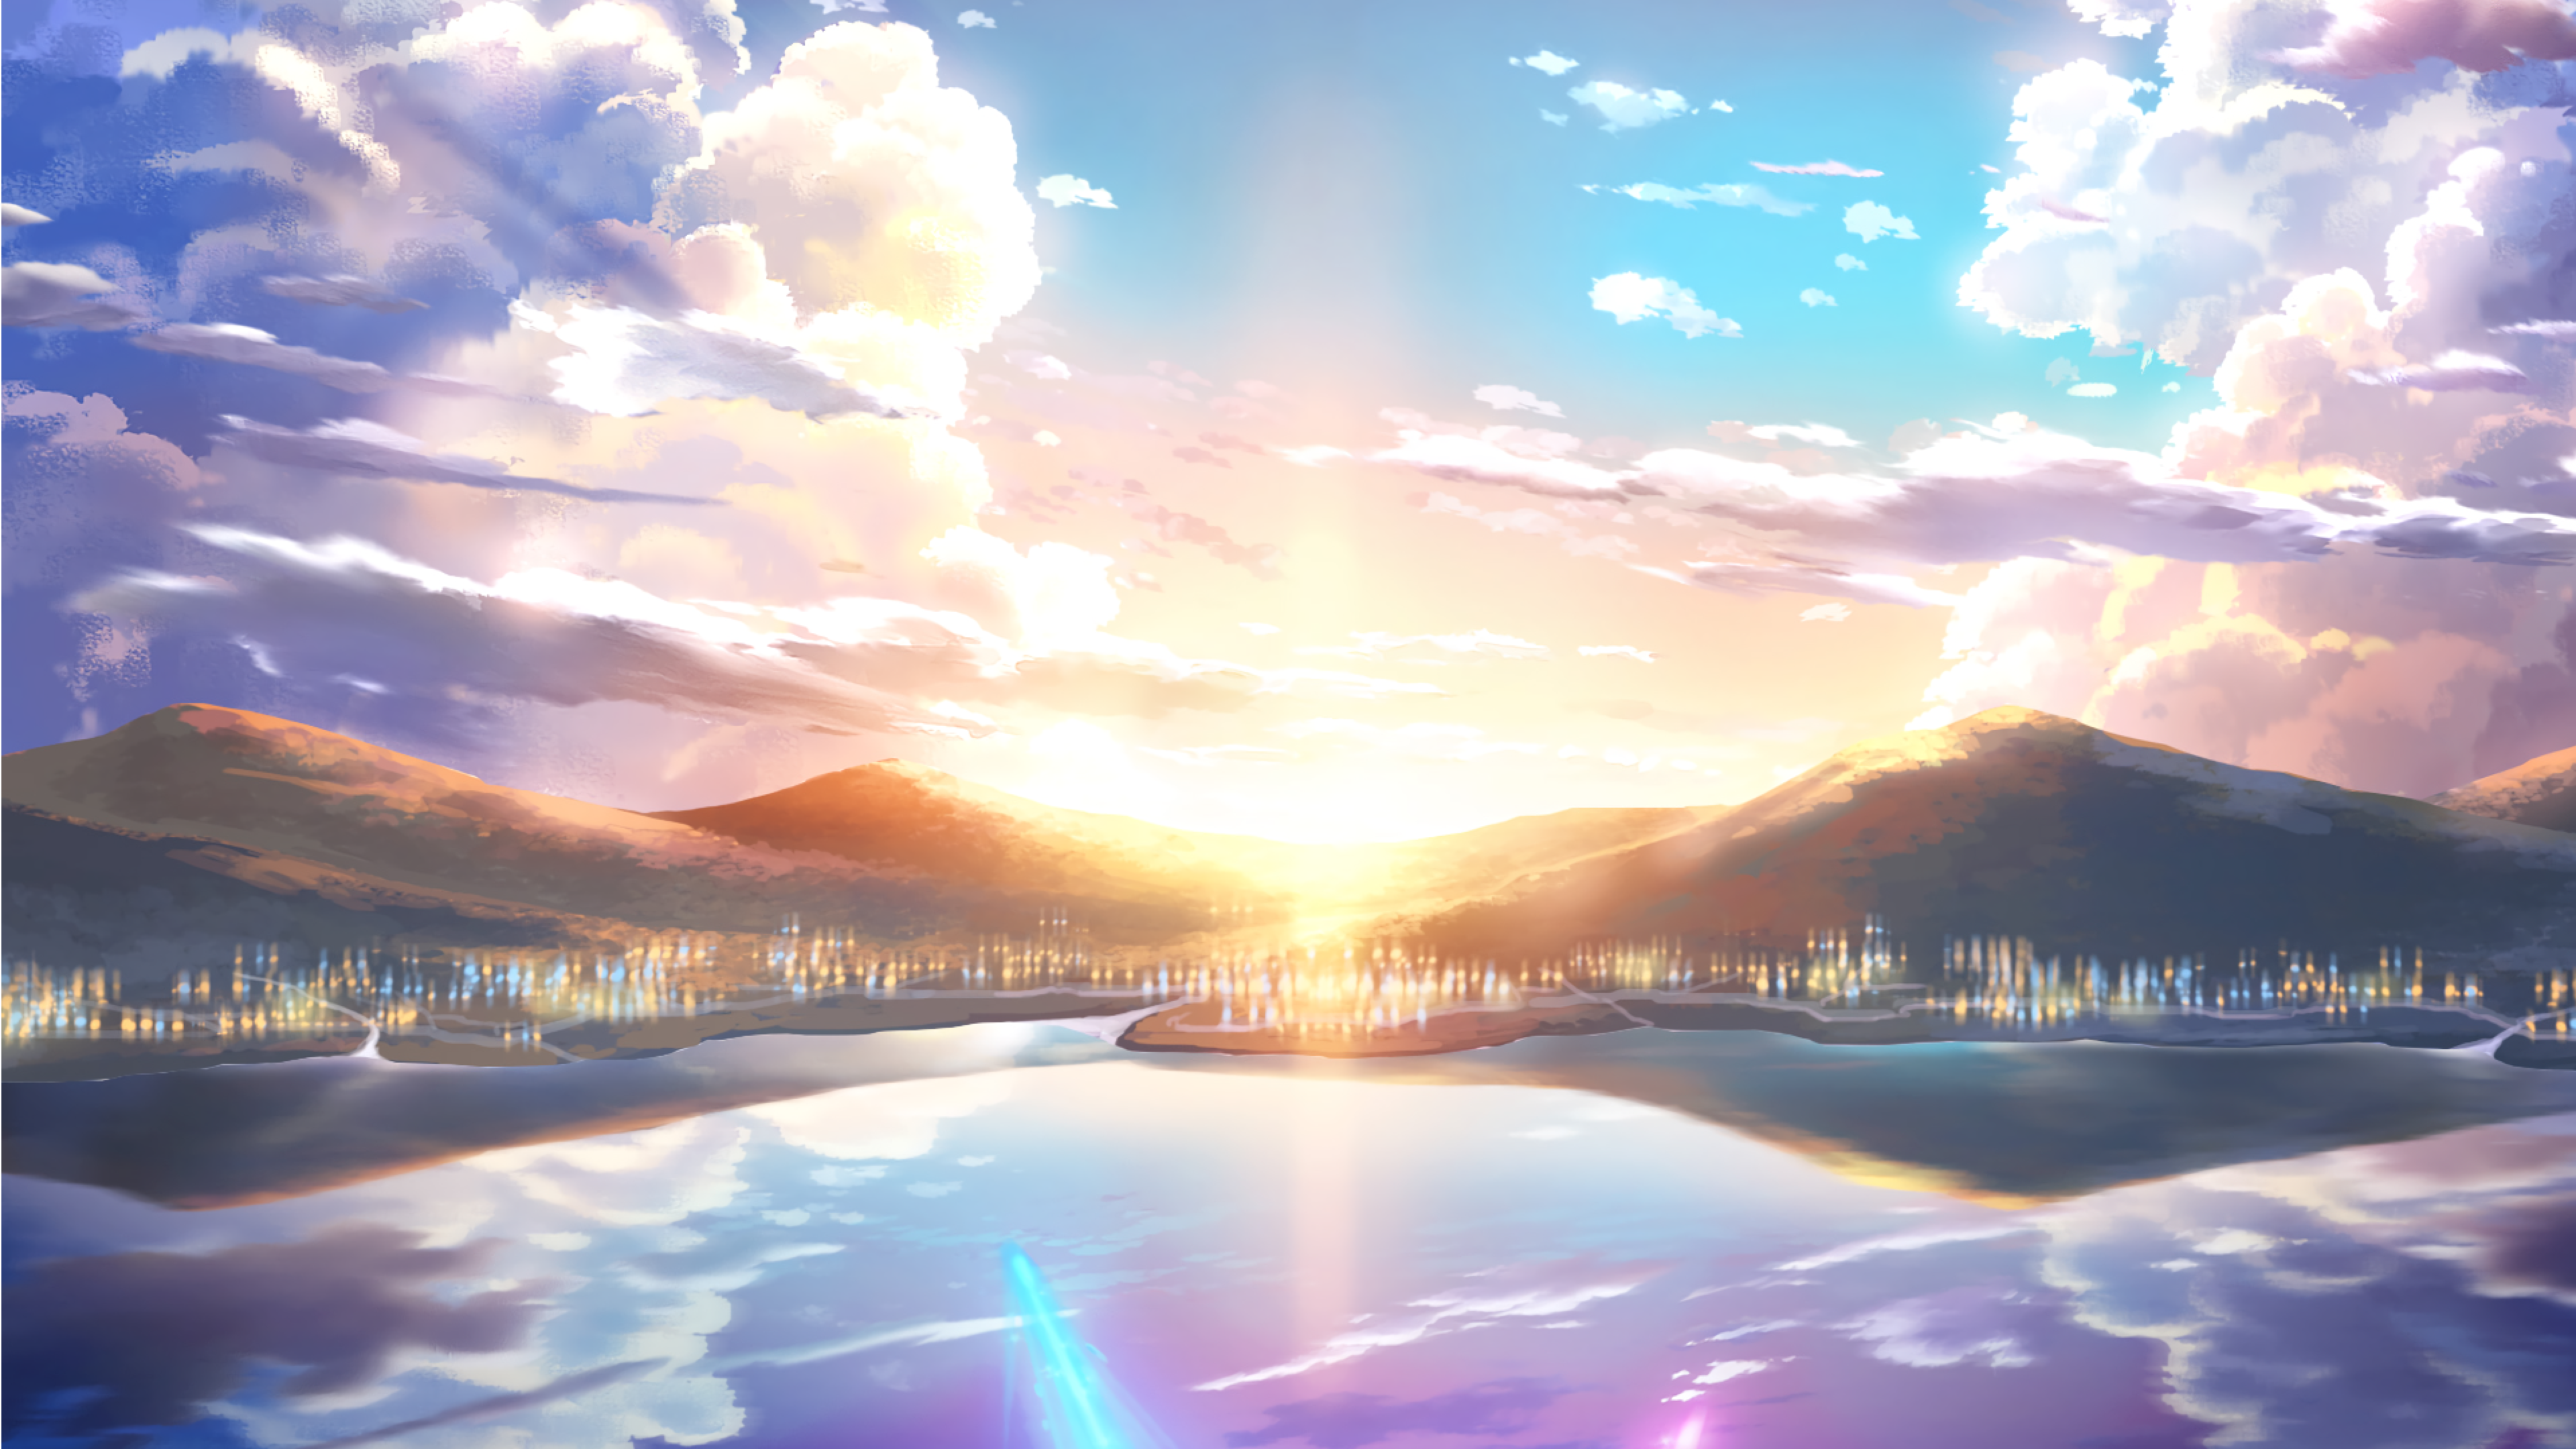 4K Ultra Hd Official Your Name Wallpaper - Forever Fuckingfat